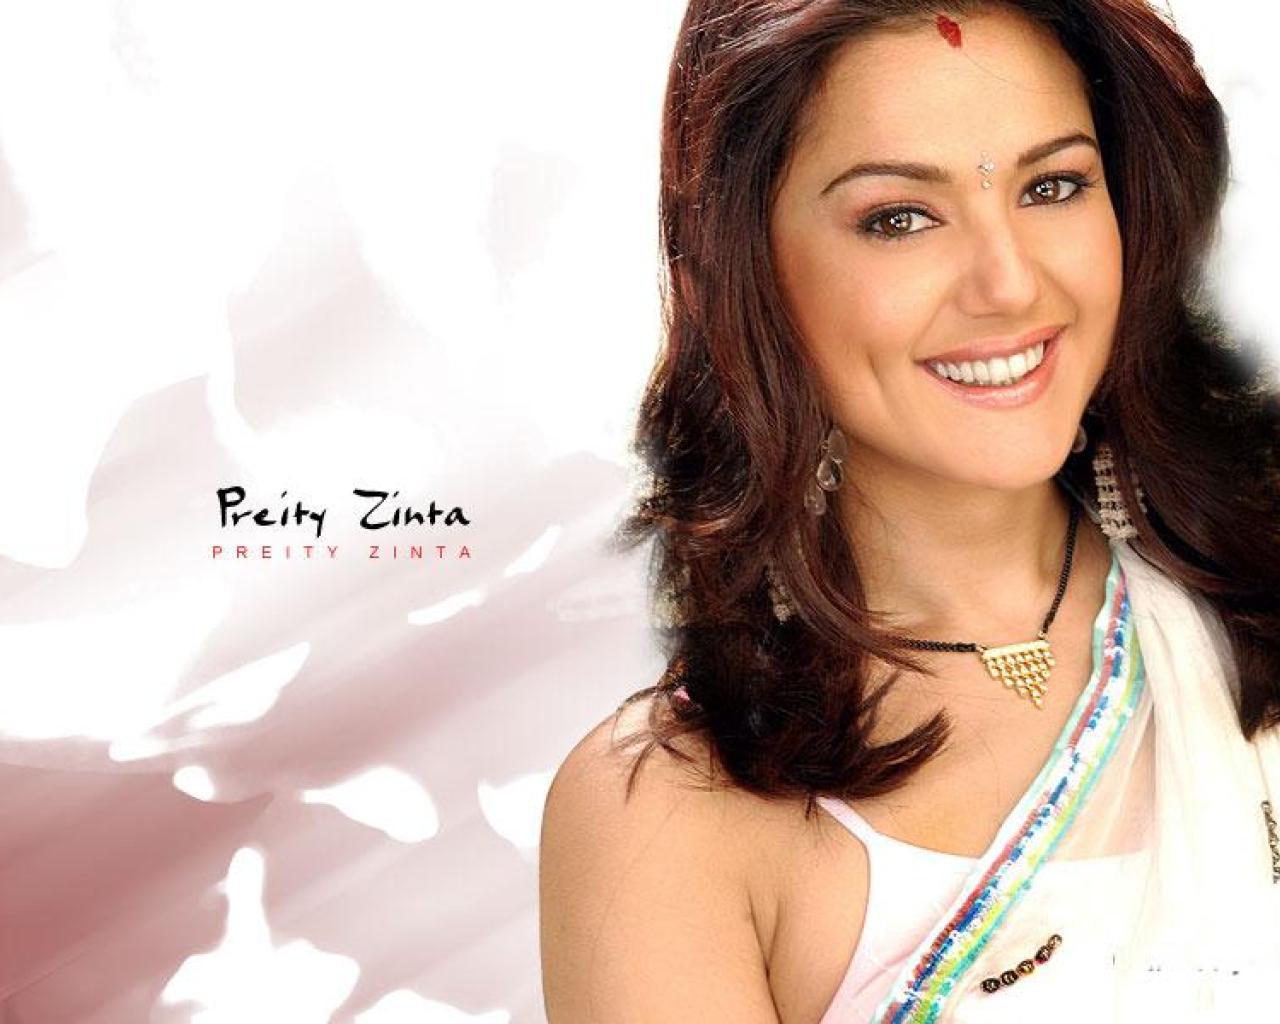 Download Free Hd Wallpapers Of Preity Zinta ~ Download